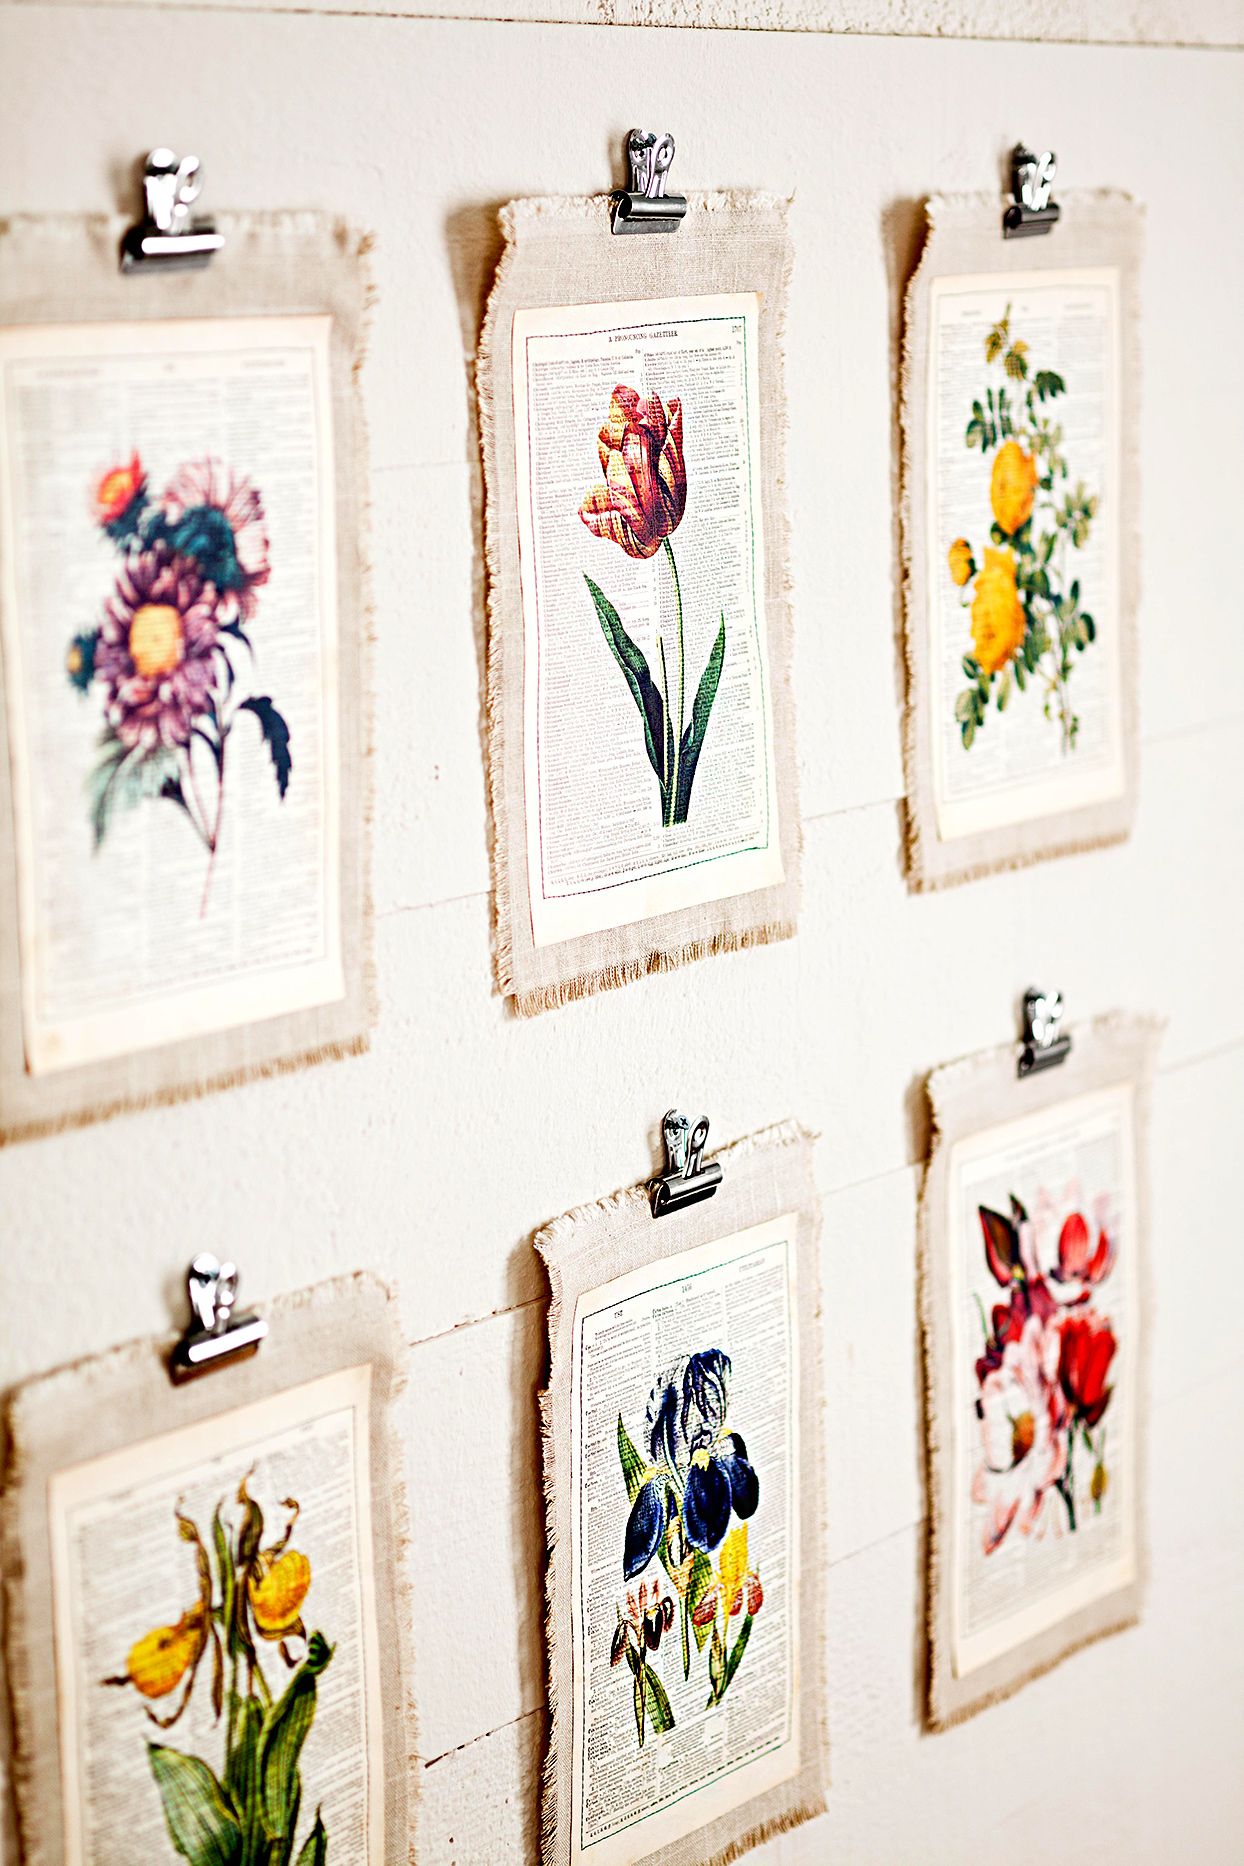 Simple ideas to spruce up your wall with
diy wall decor